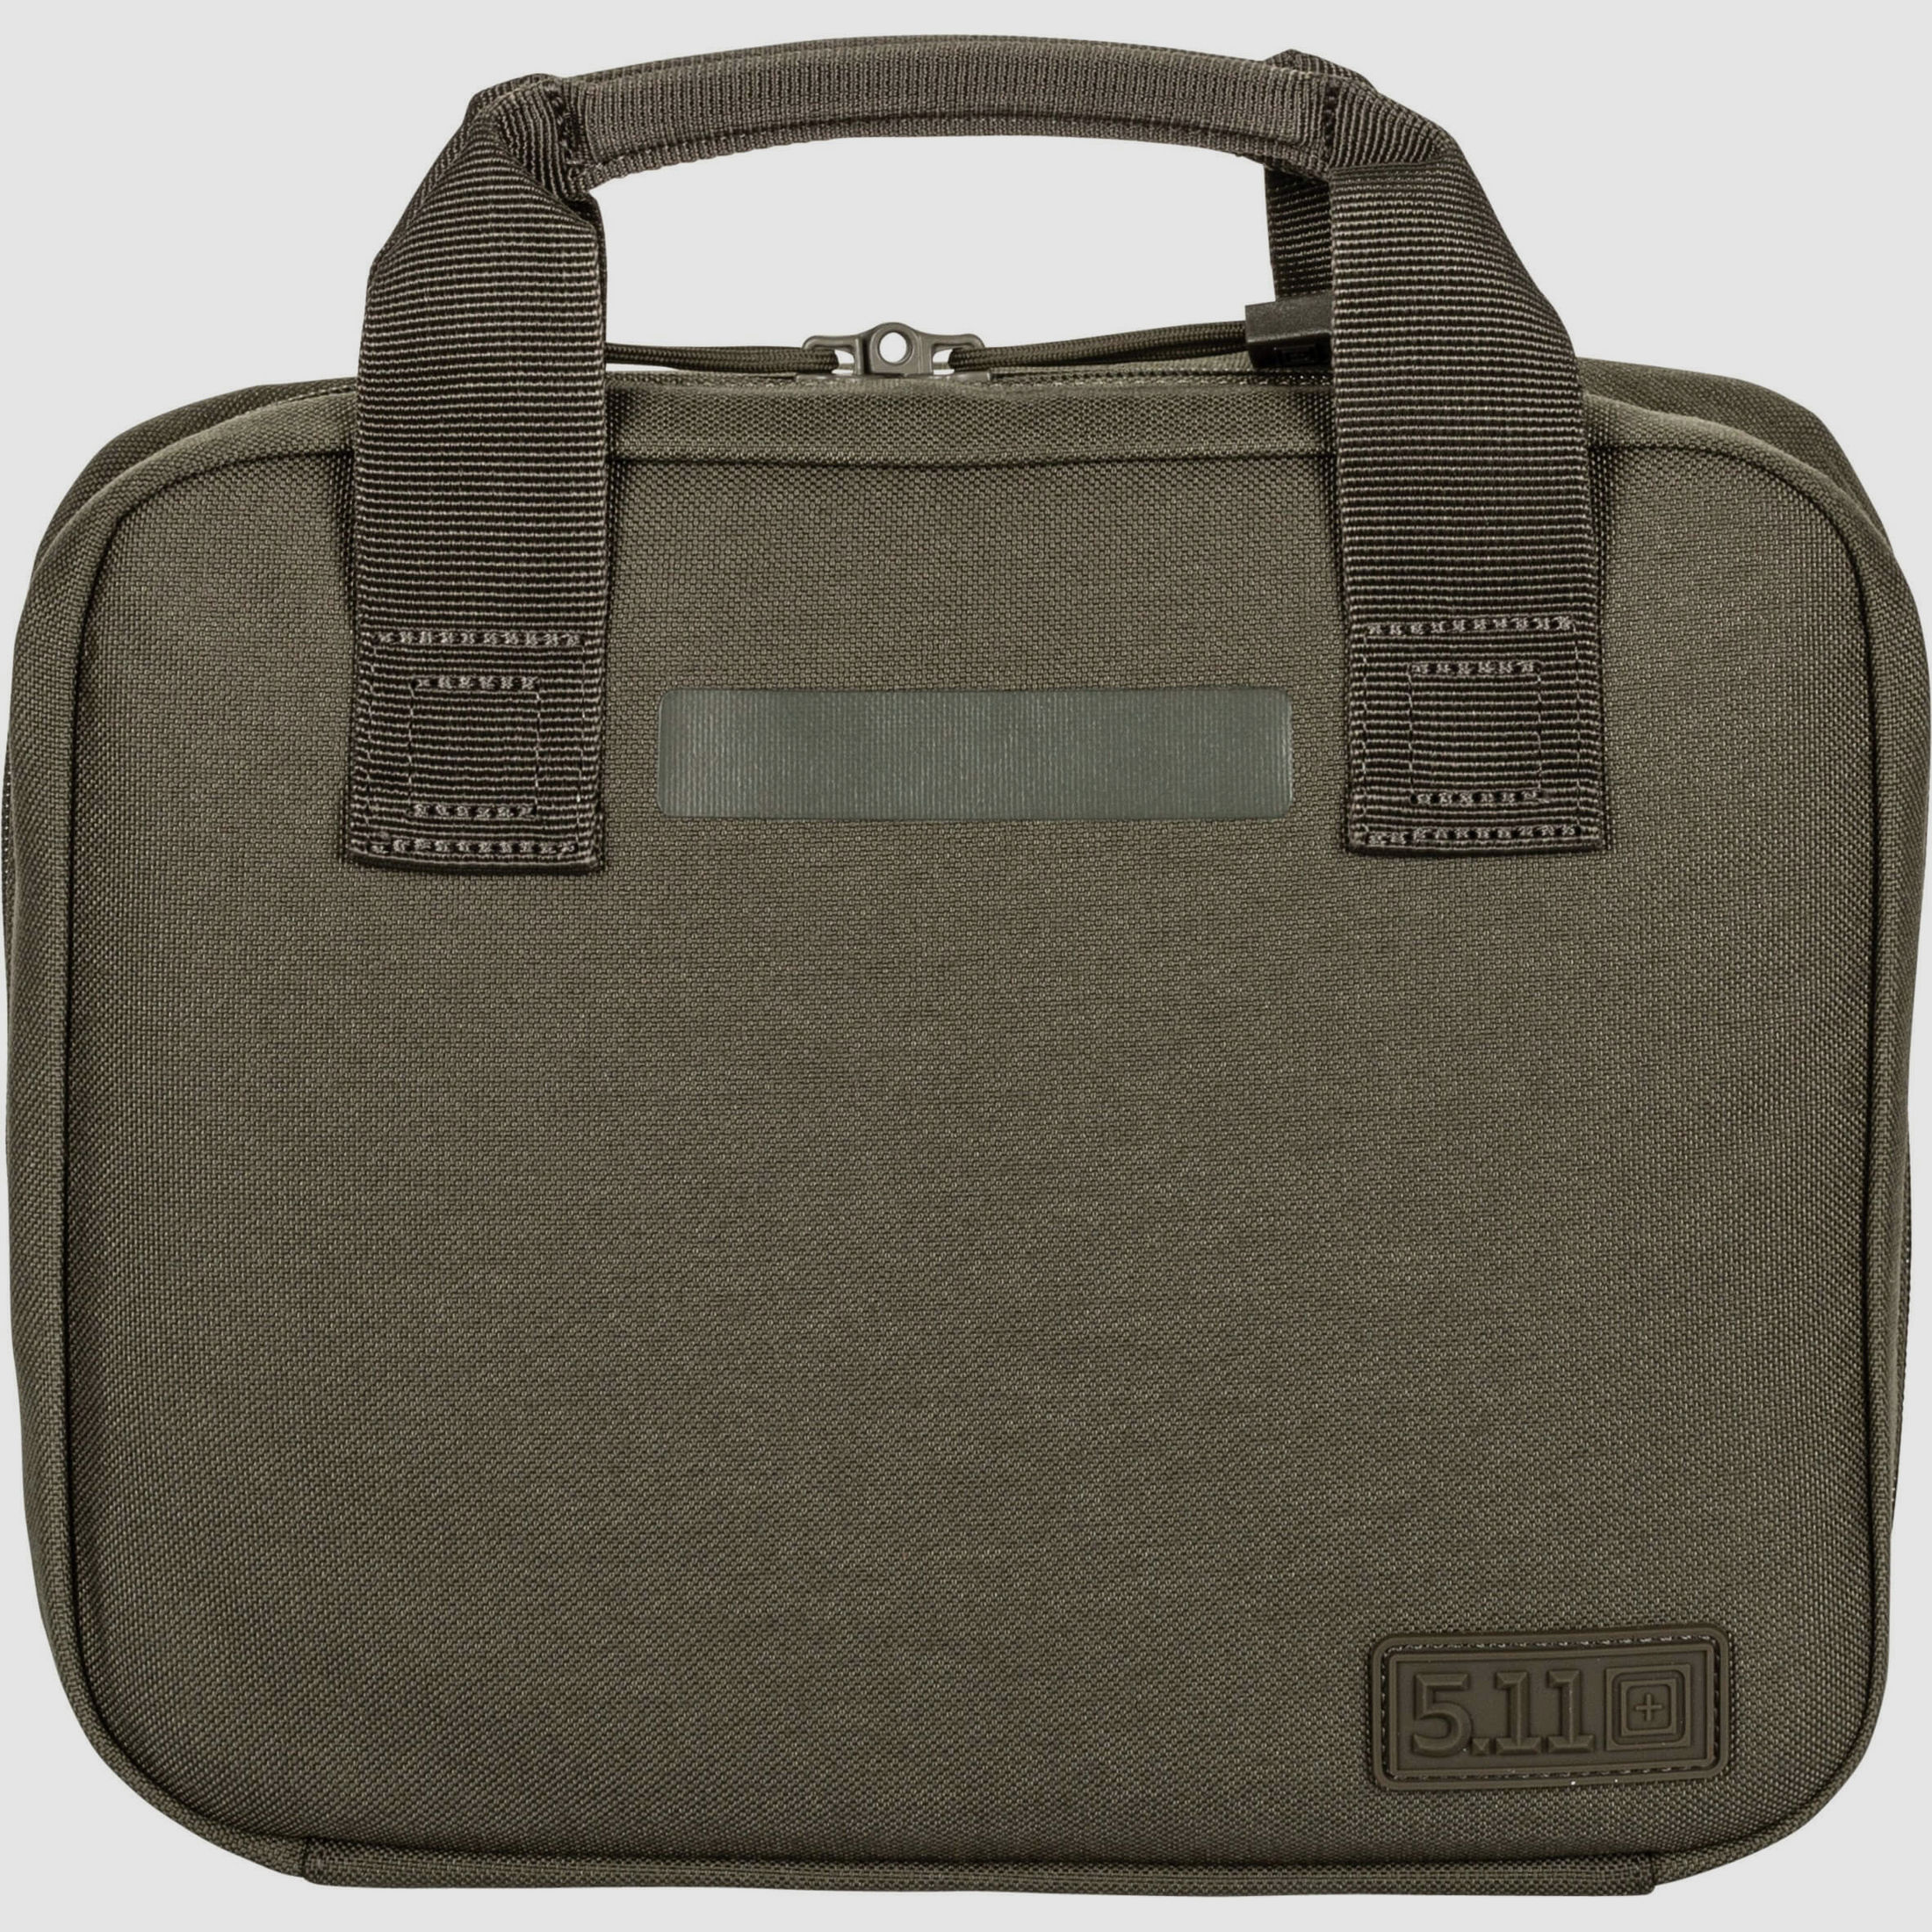 5.11 TACTICAL DOUBLE PISTOL CASE - OD Green